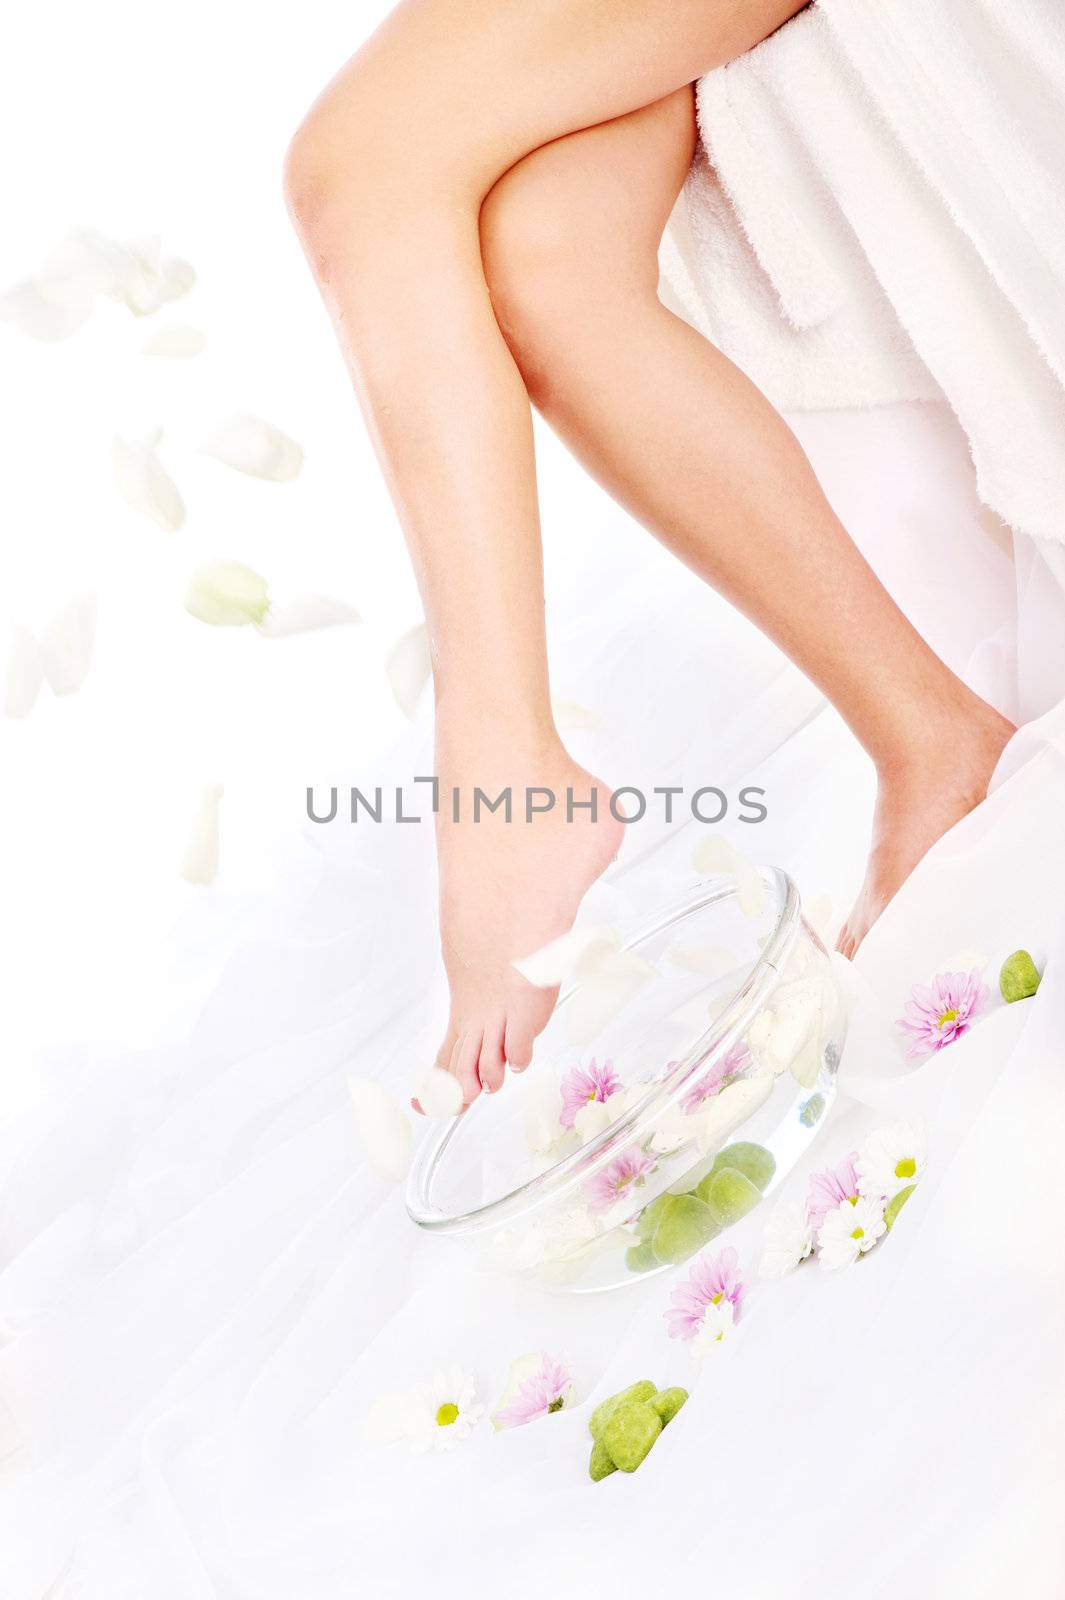 Legs of beautiful girl with aromatherapy bowl and falling petals